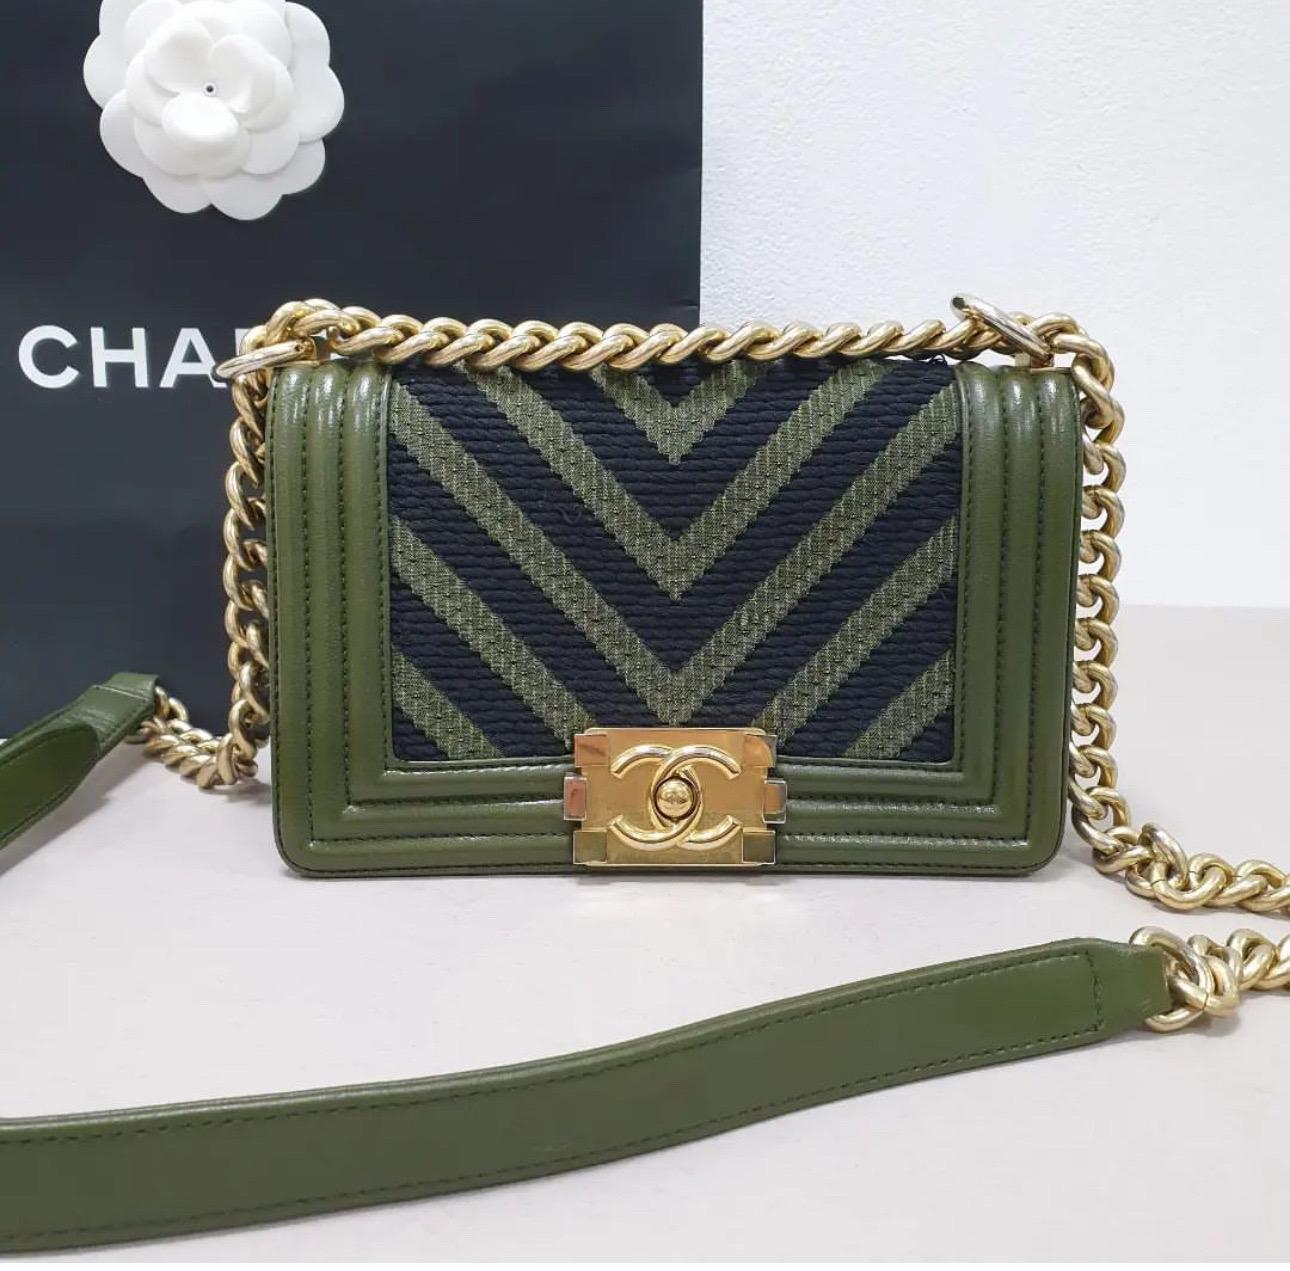 The Chanel Boy line is famous for its modern, chic look that is bold and feminine at the same time. Hallmarks of this line include  hardware, rectangular CC clasp and chevron quilts framed in vertical and horizontal lined frames. A cult favorite